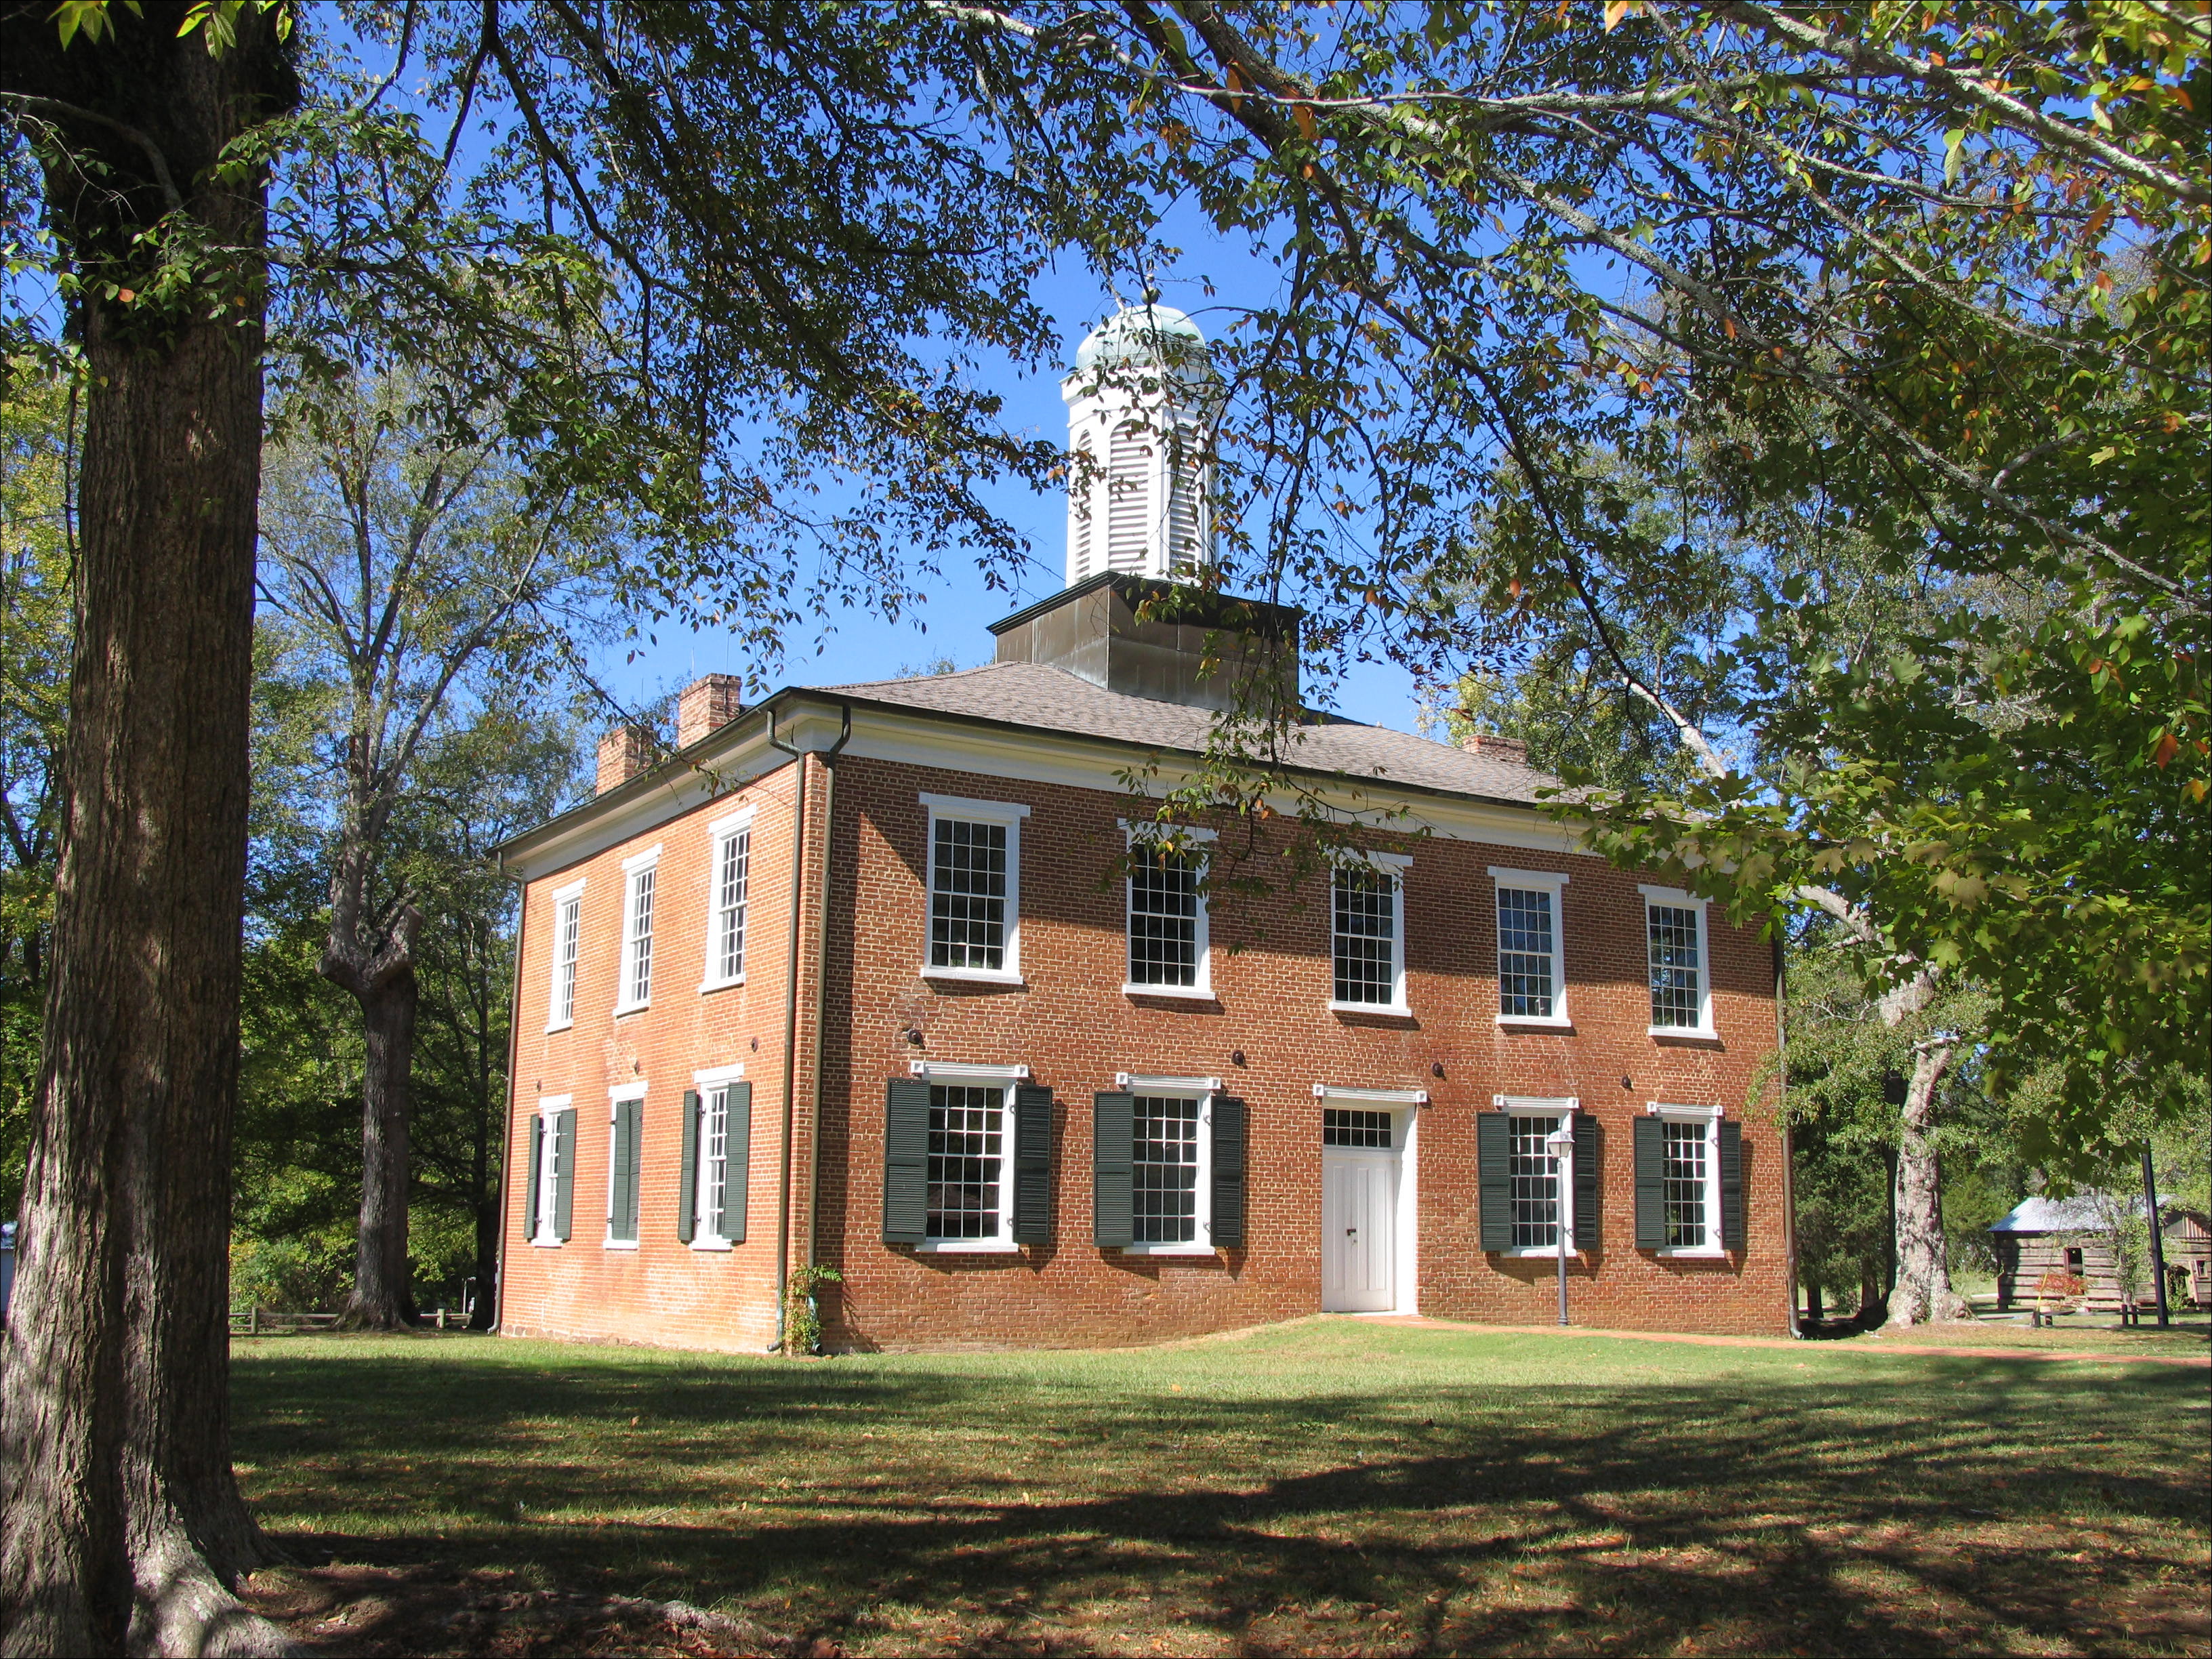 The Jacinto Courthouse built in 1836. Photo courtesy: The Daily Corinthian